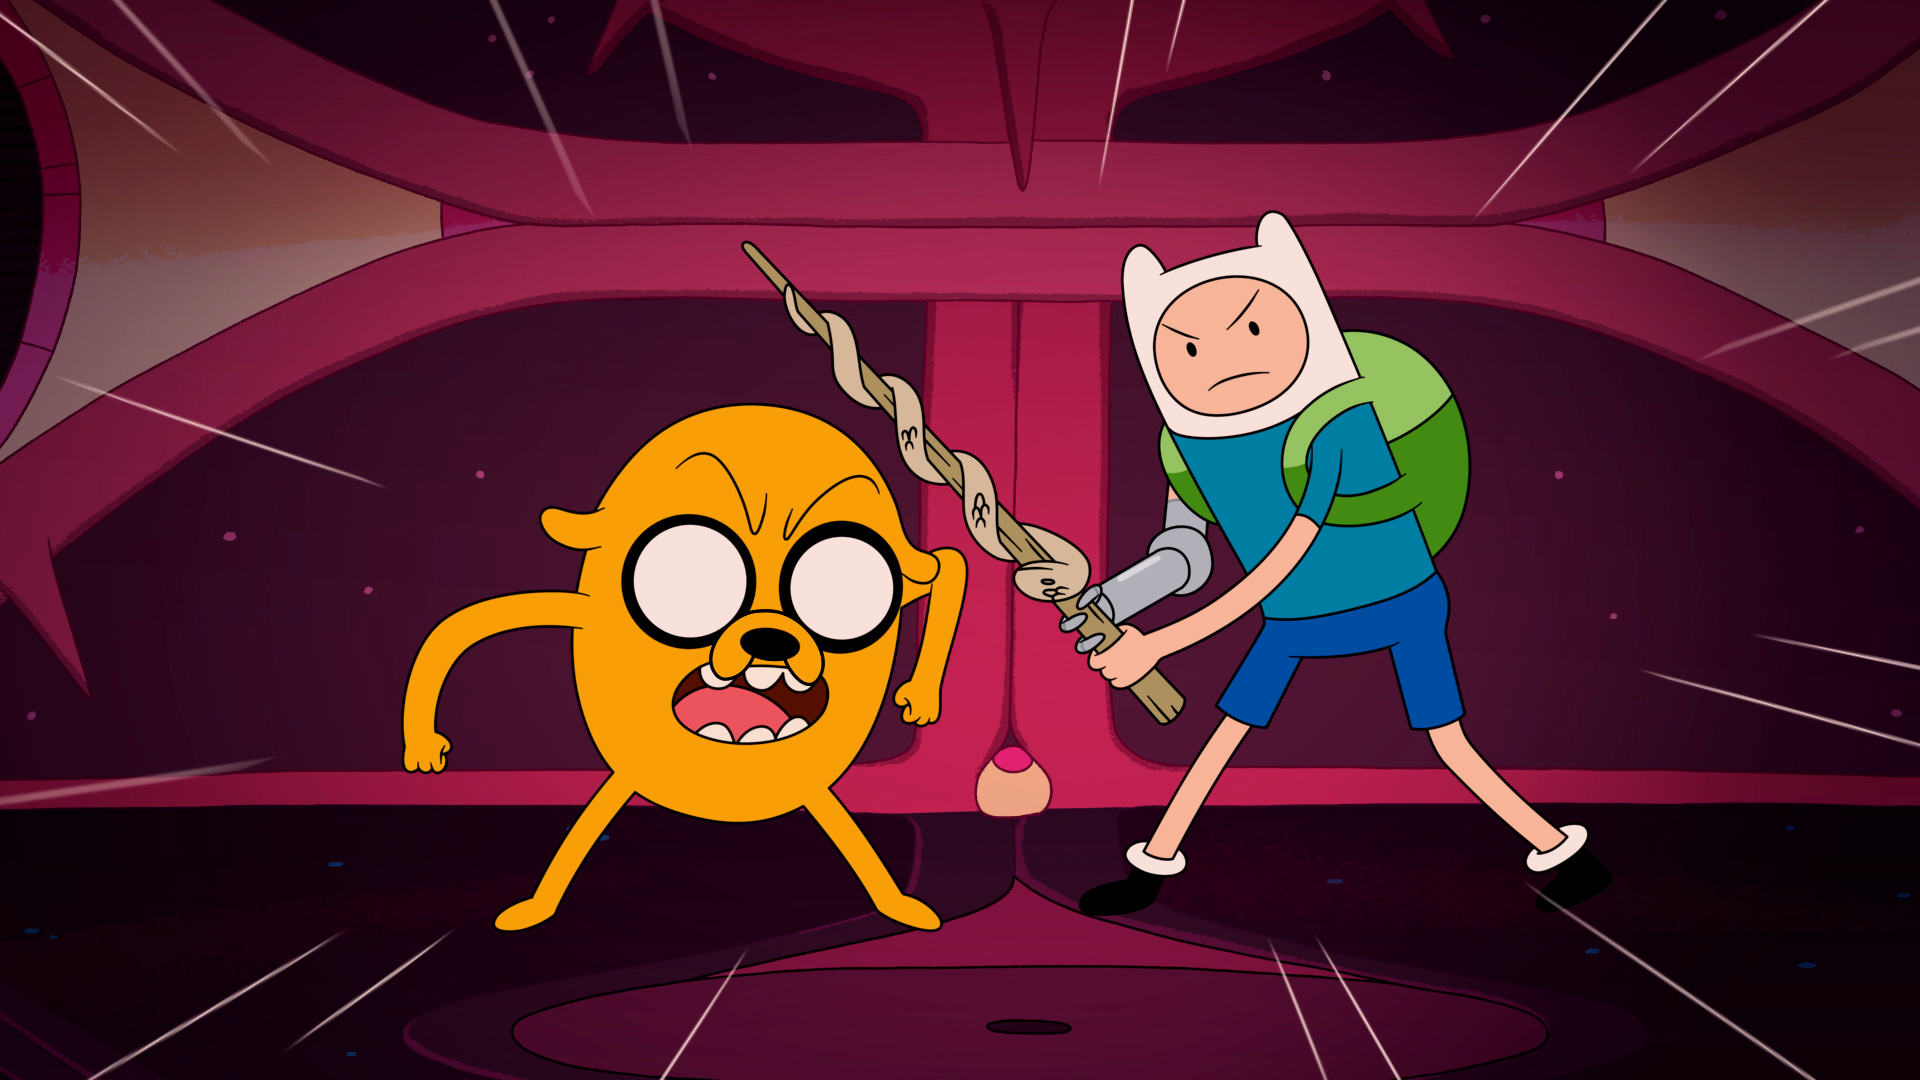 Synchronize your watches to Adventure Time